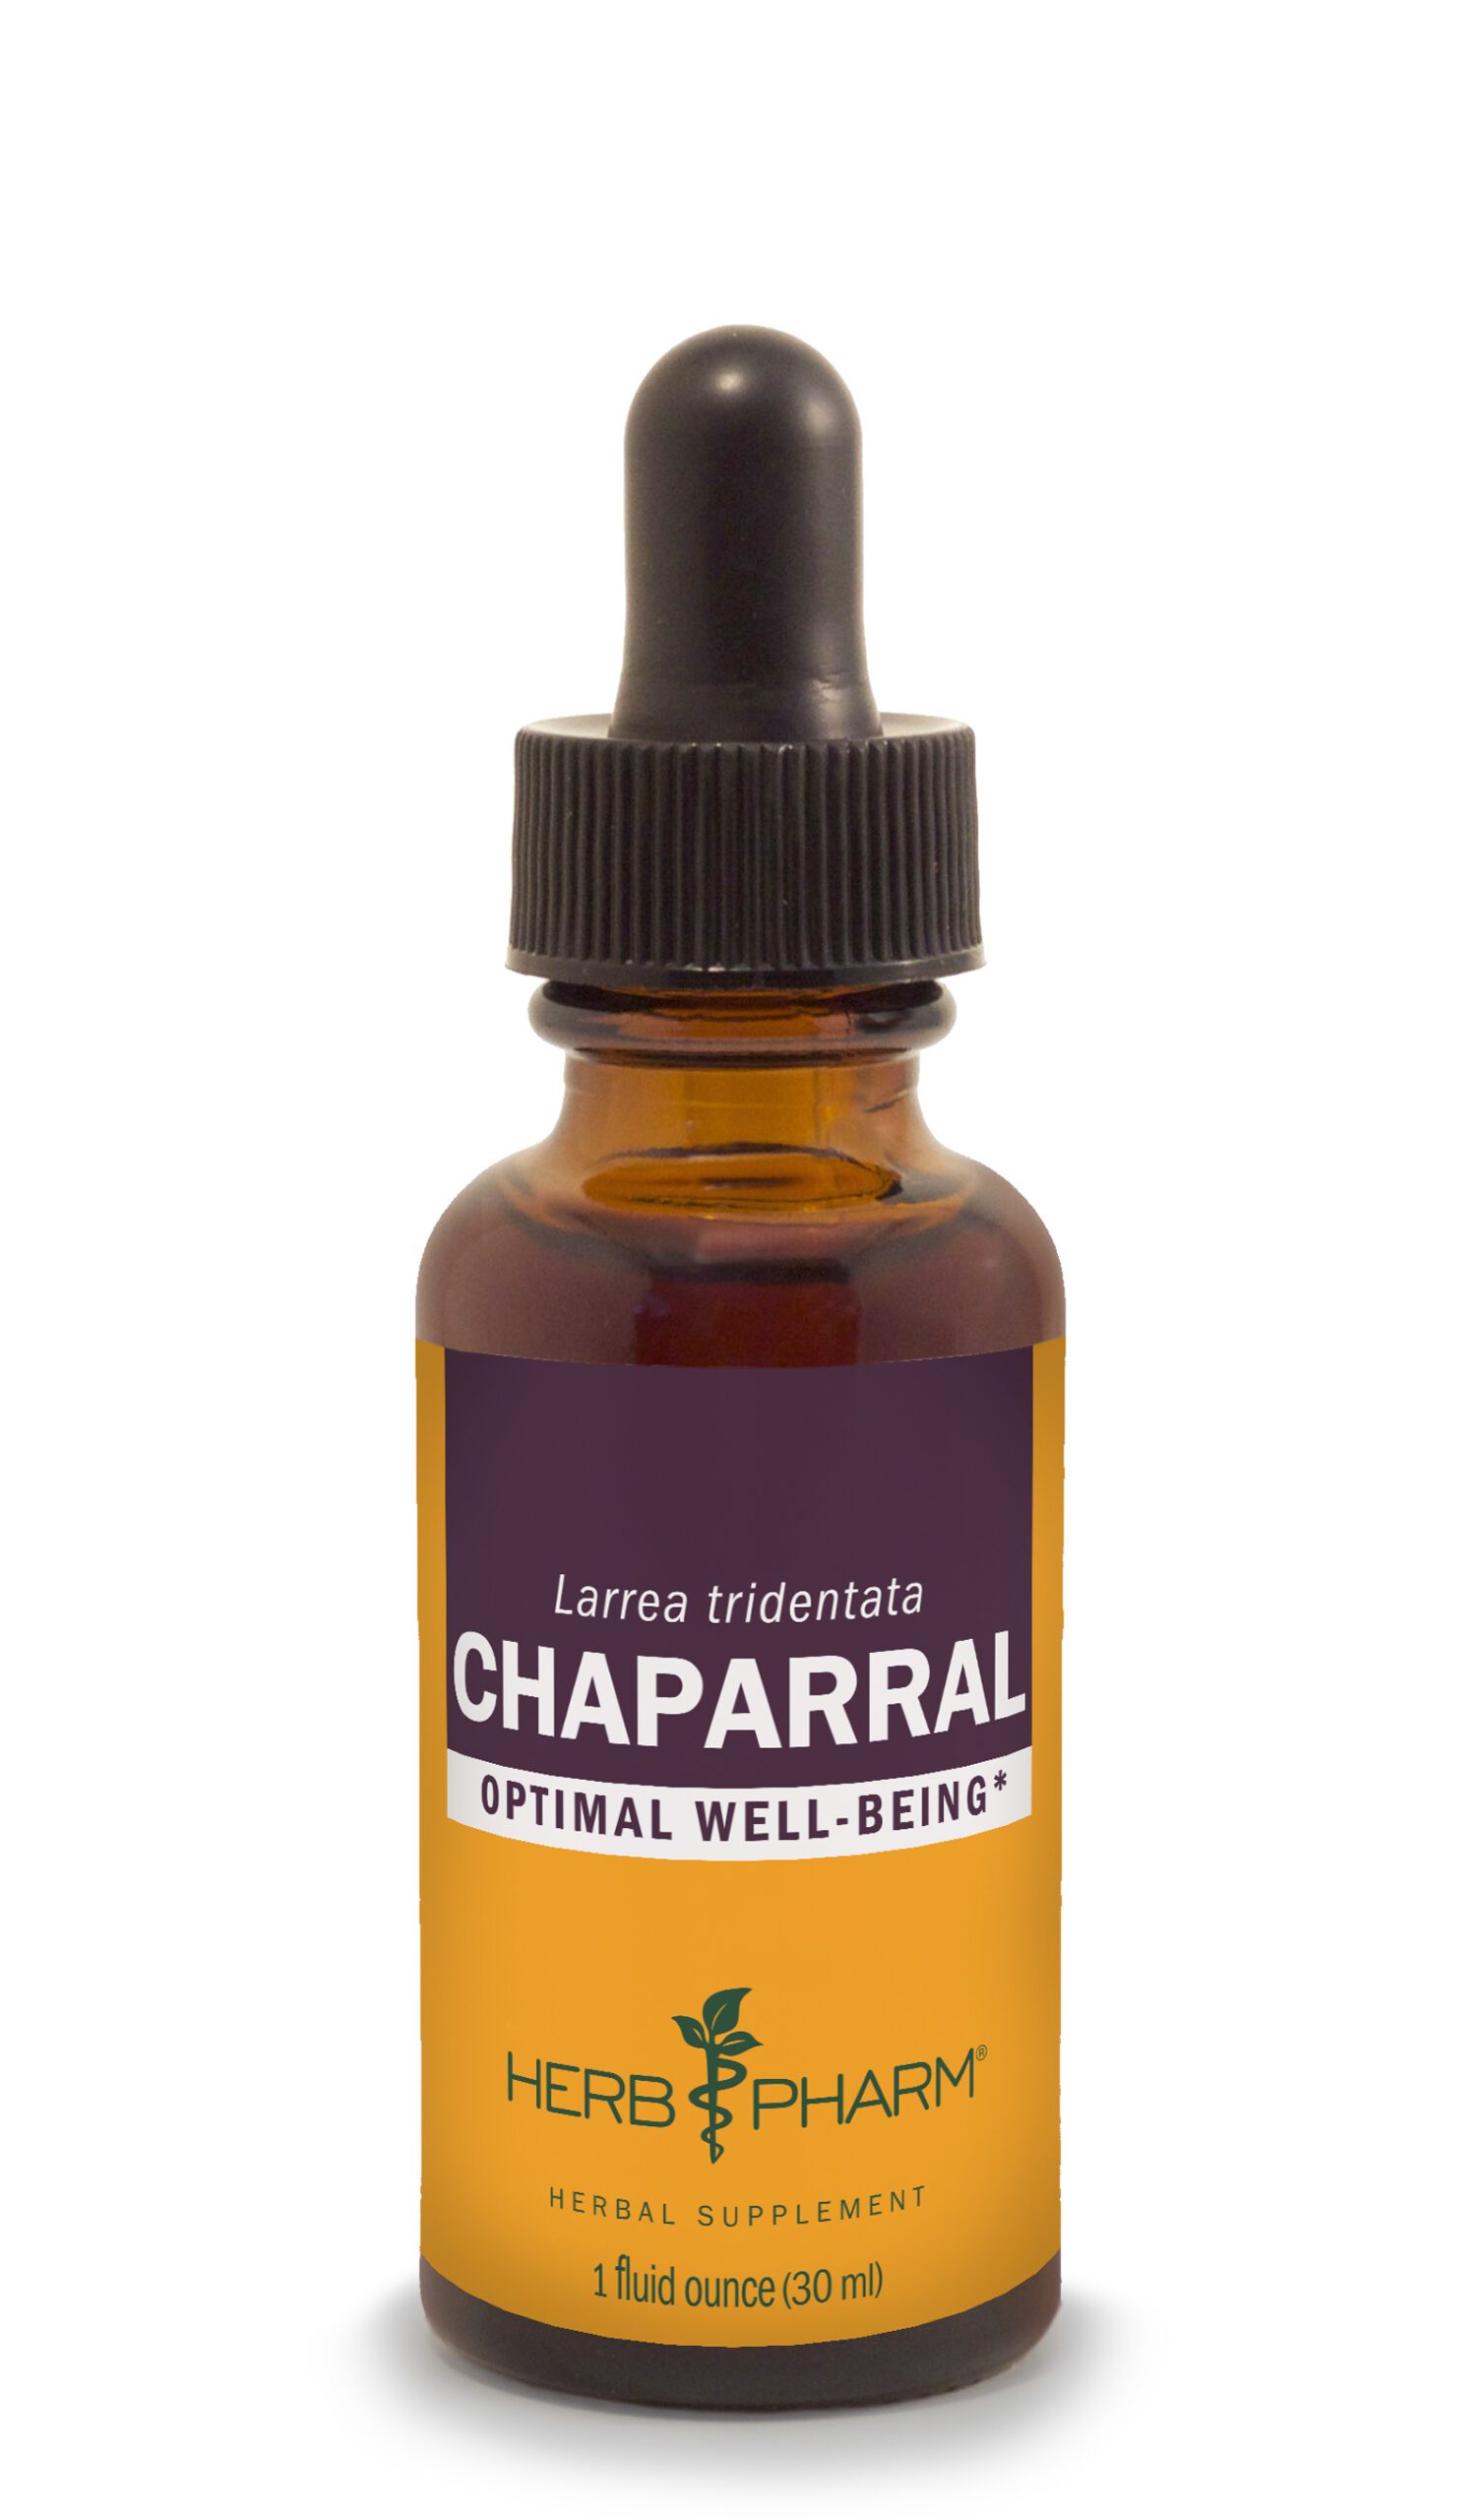 Product Listing Image for Herb Pharm Chaparral Tincture 1oz